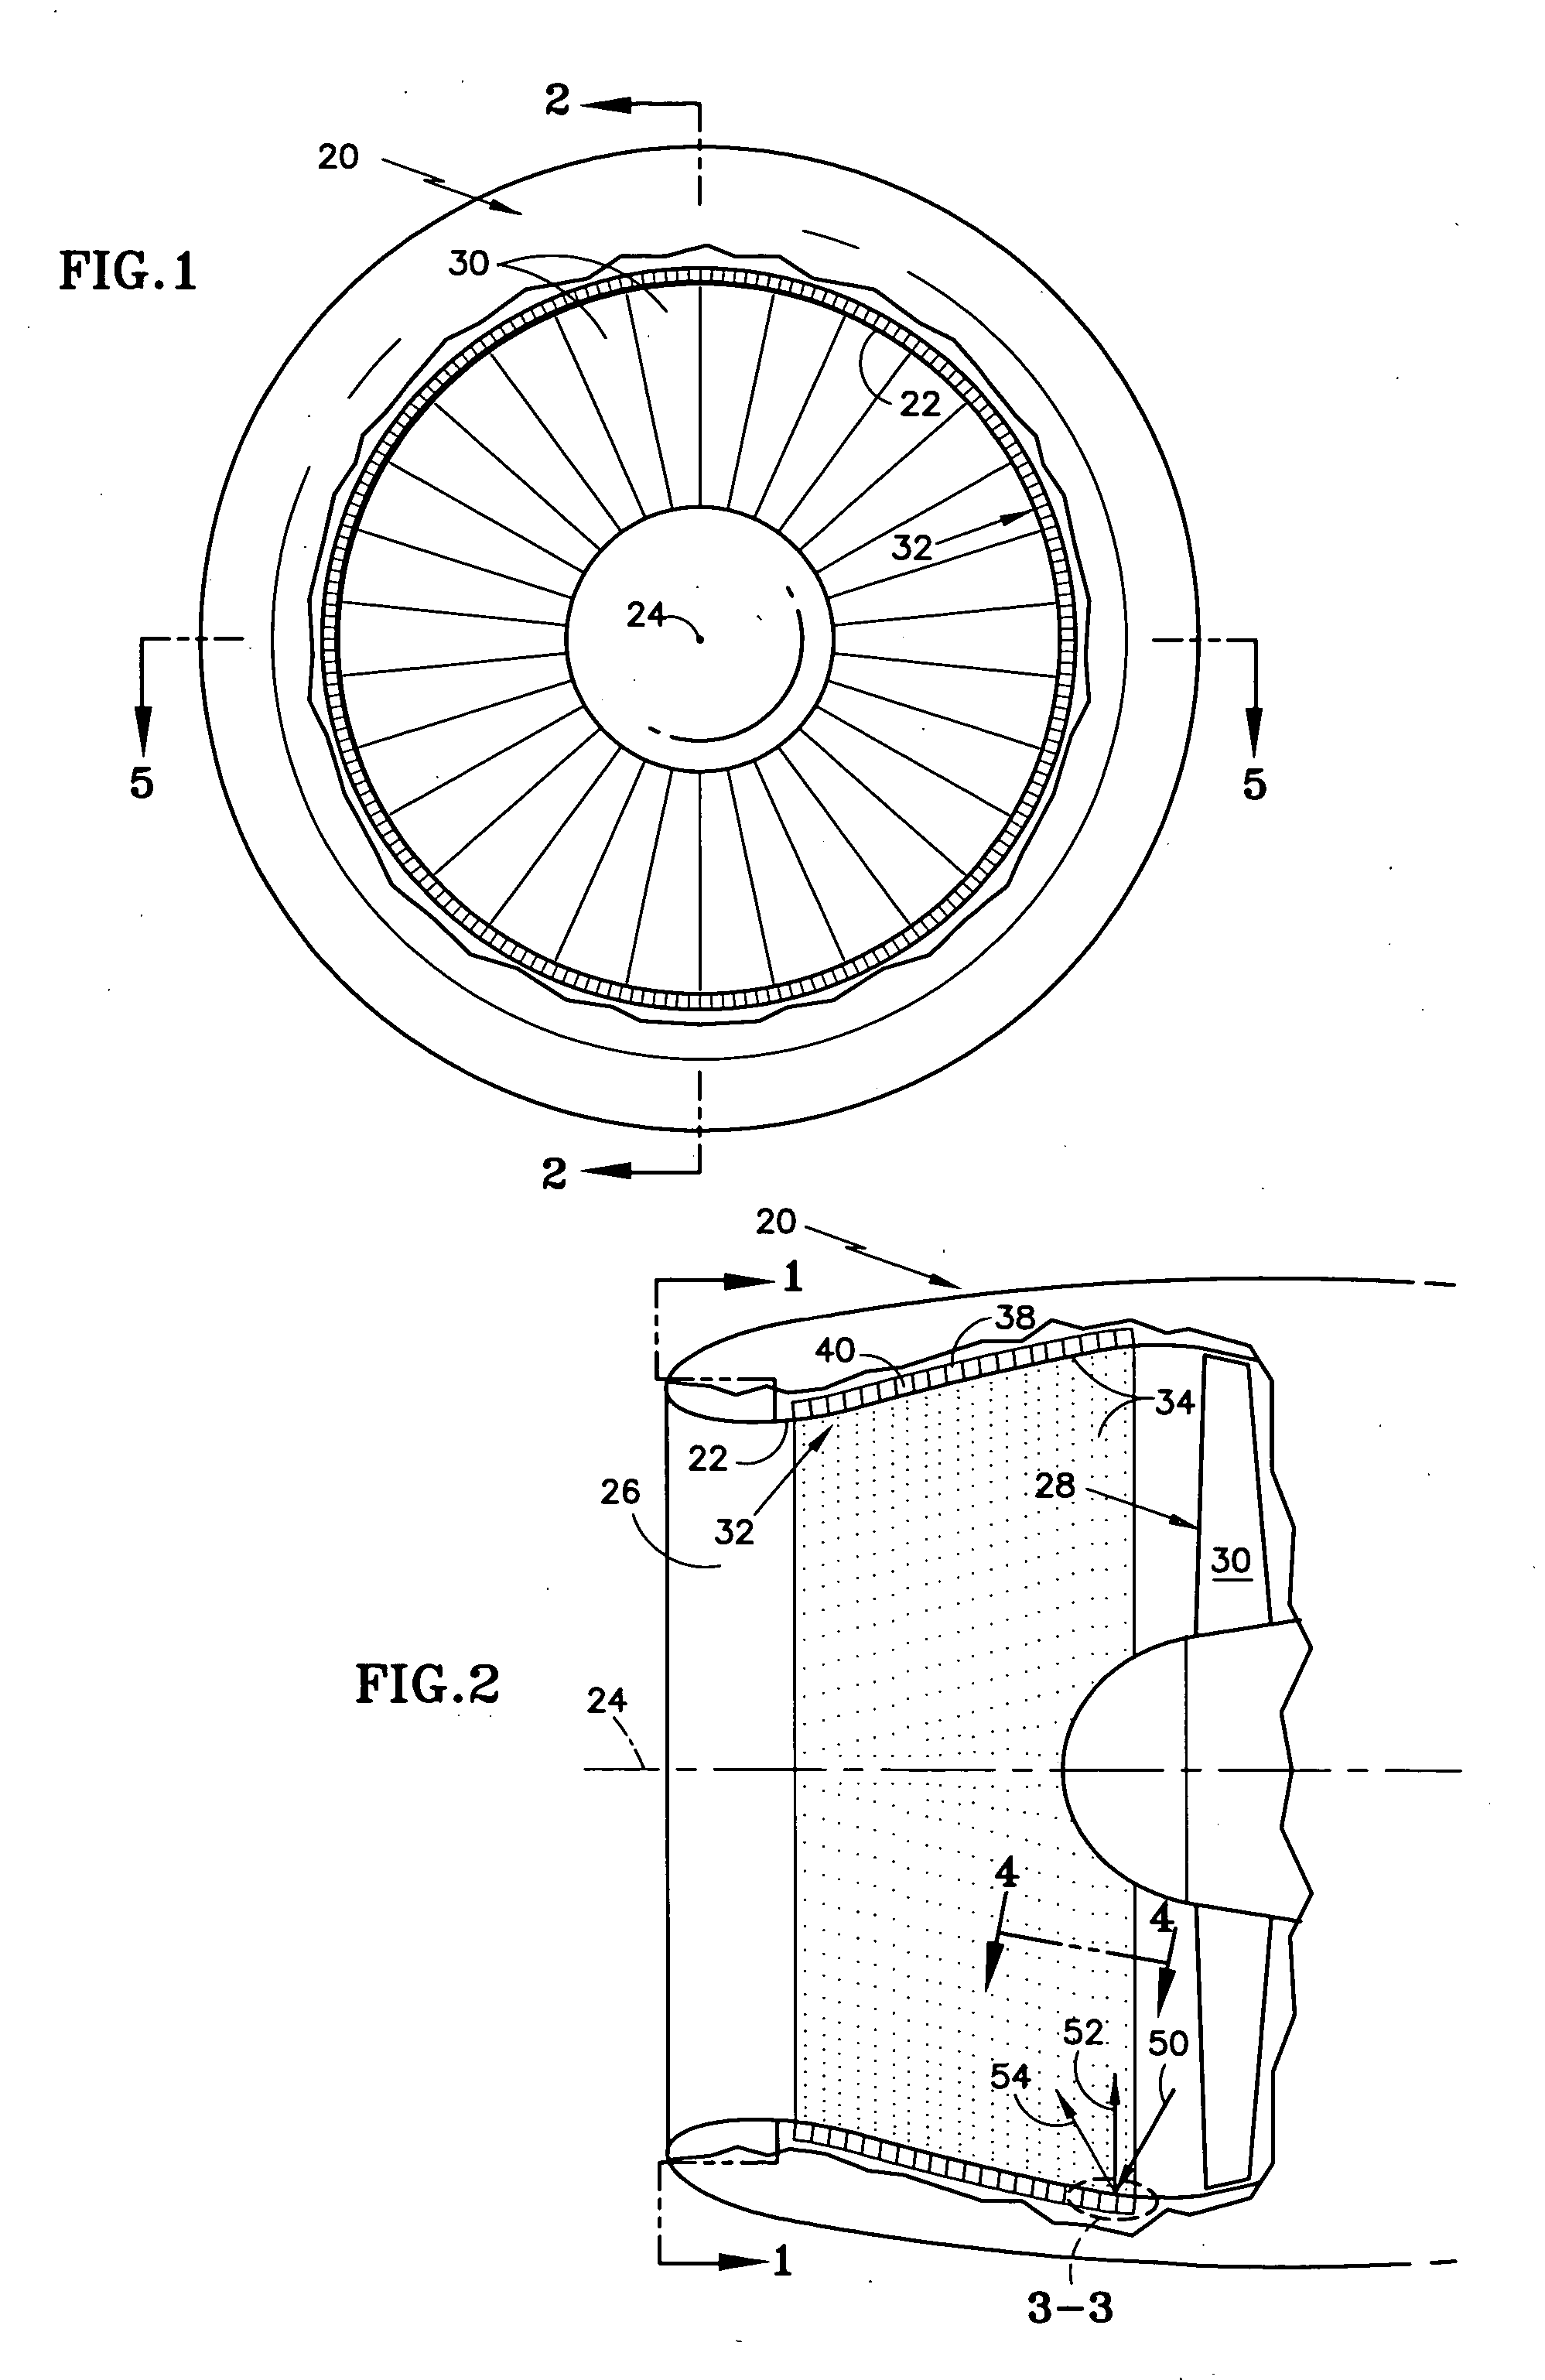 Acoustic liner with nonuniform impedance